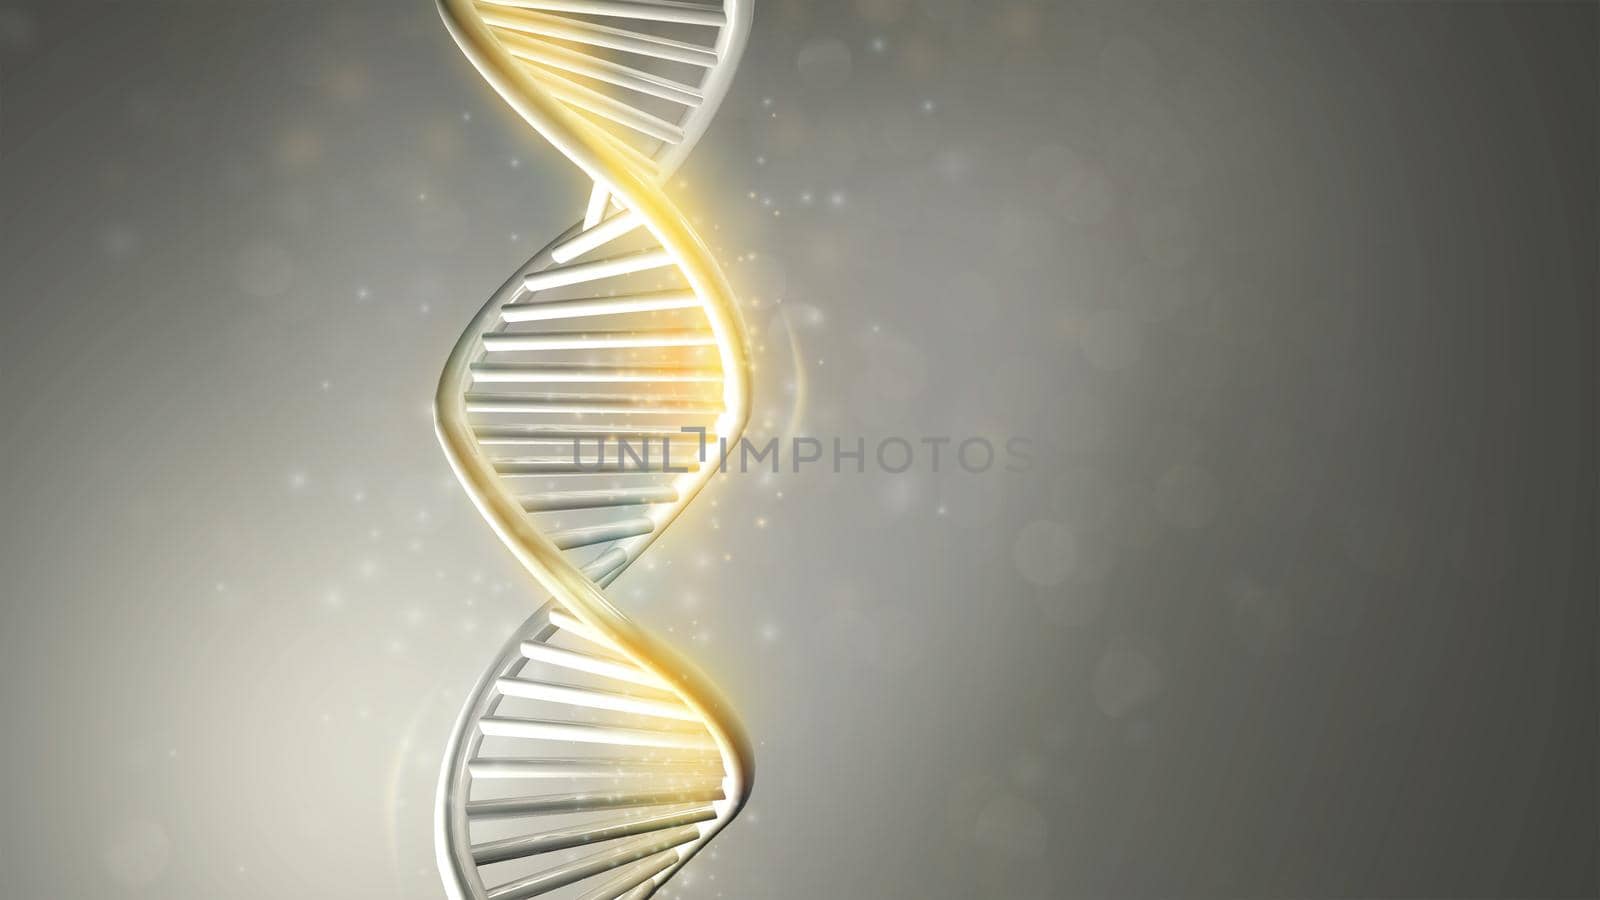 Vertical model of double helix DNA with golden glow on gray background. 3D render.